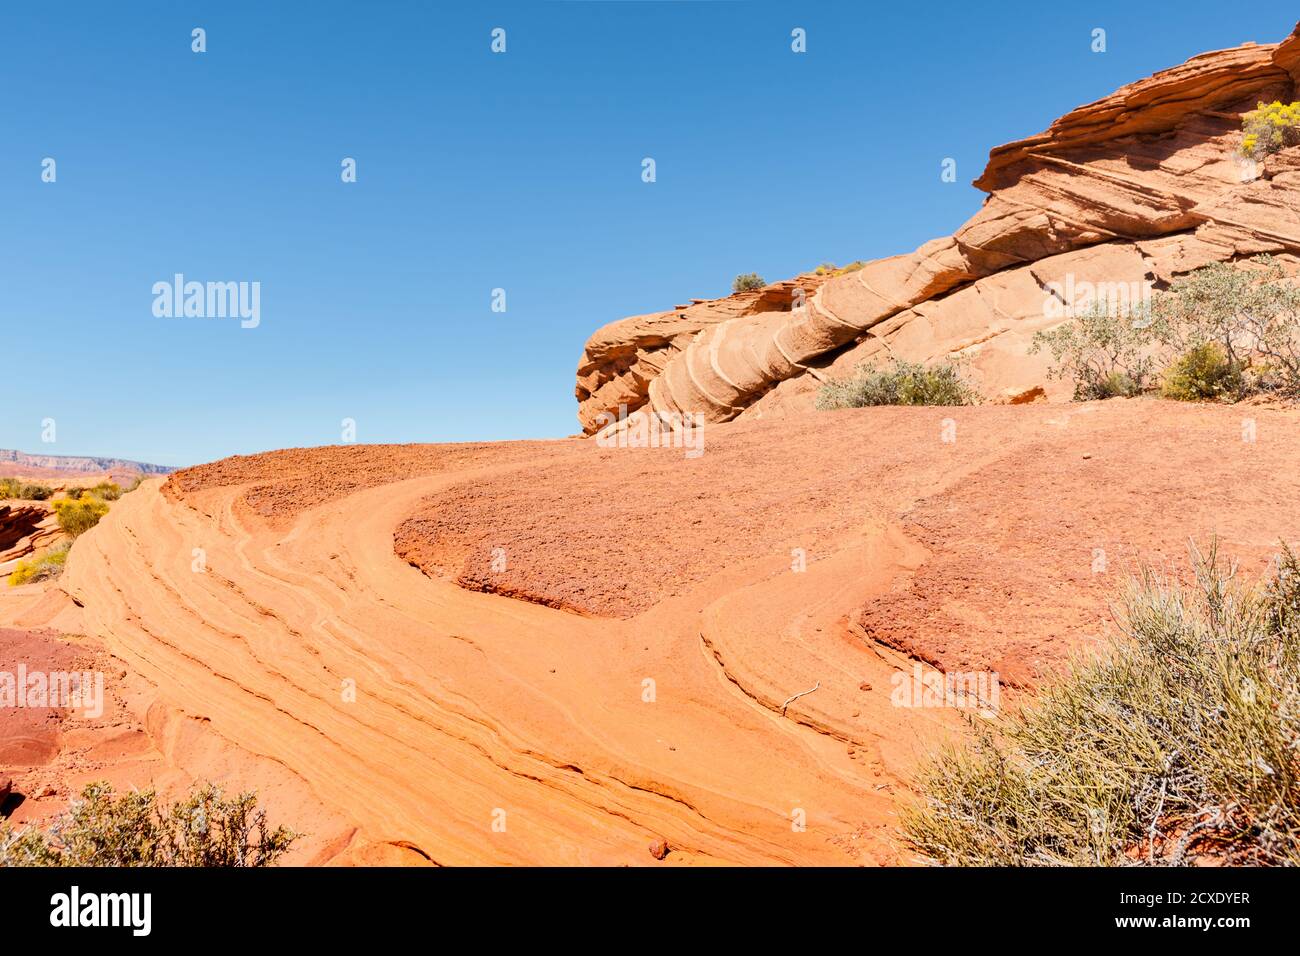 Geological rock hill with stratifaction effect from weathering over millennia Stock Photo